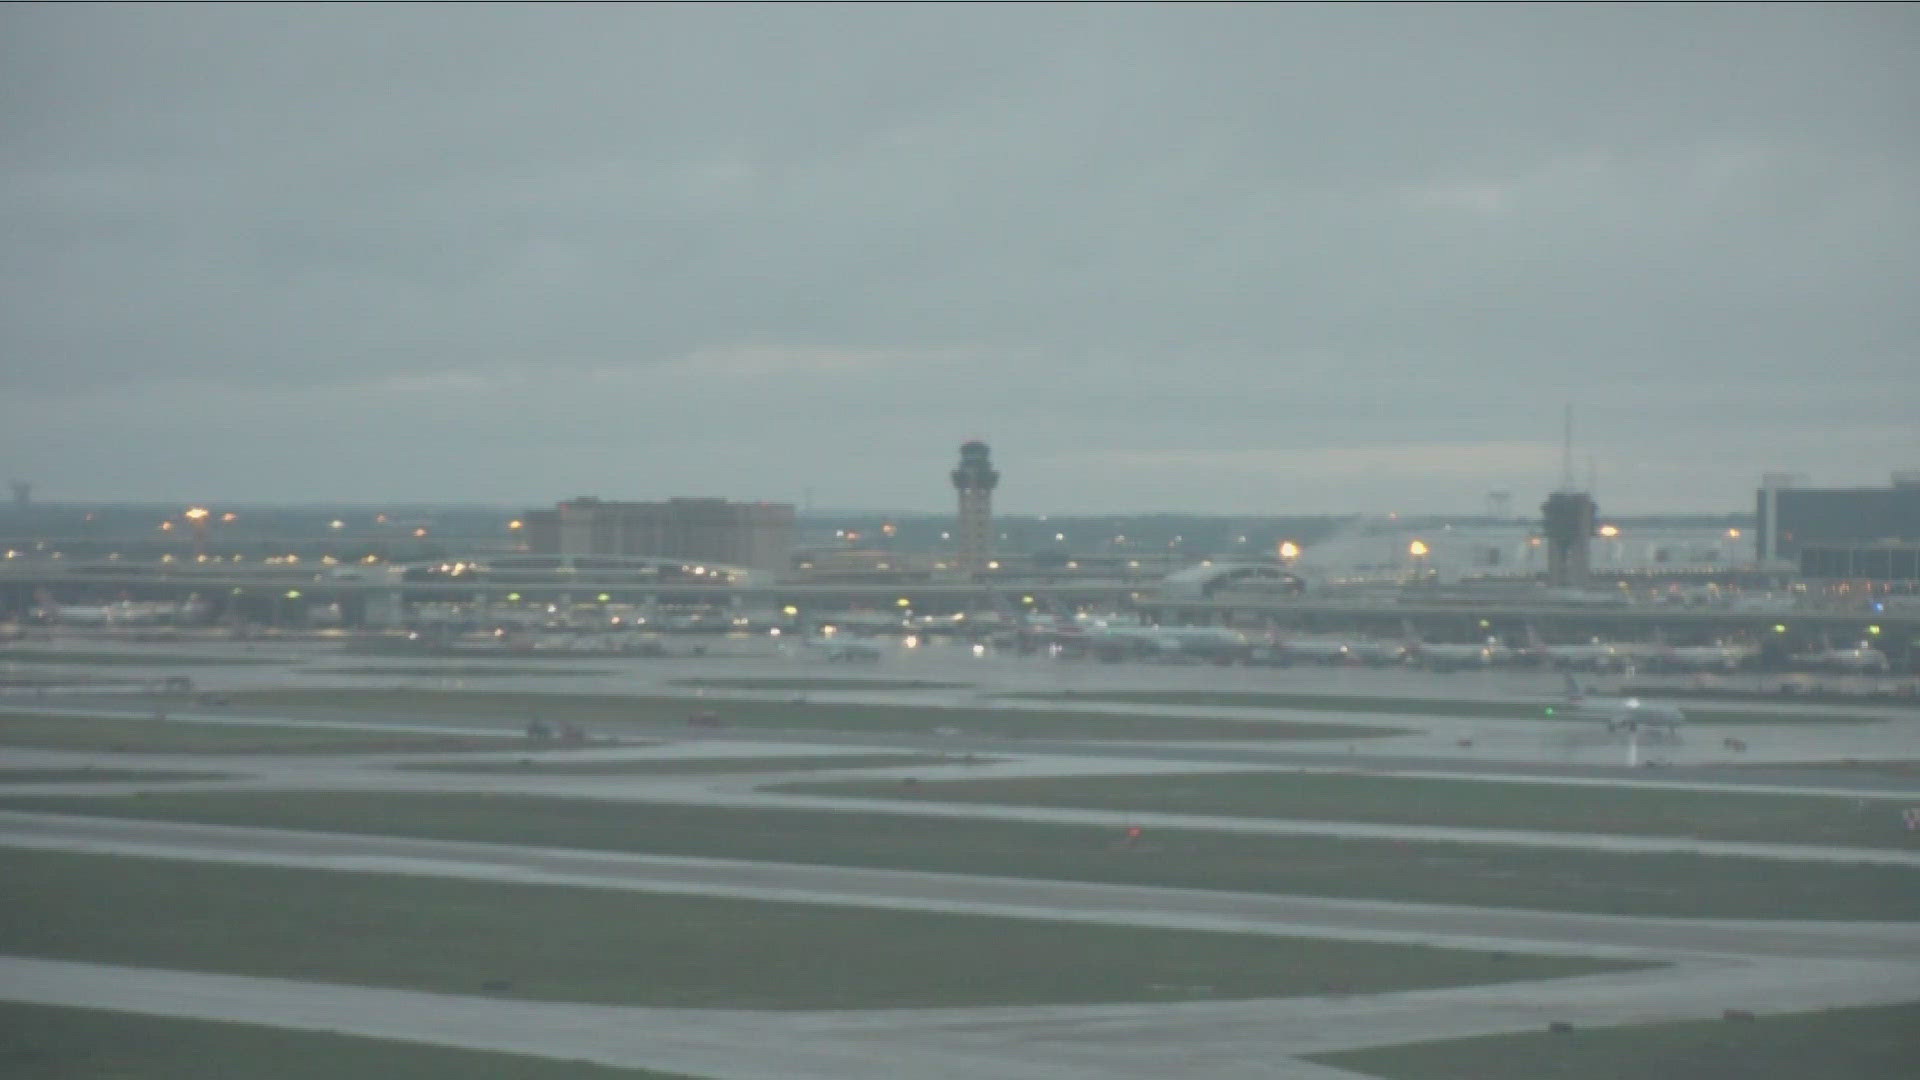 Hundreds of flights were delayed and several were cancelled following heavy rain in DFW